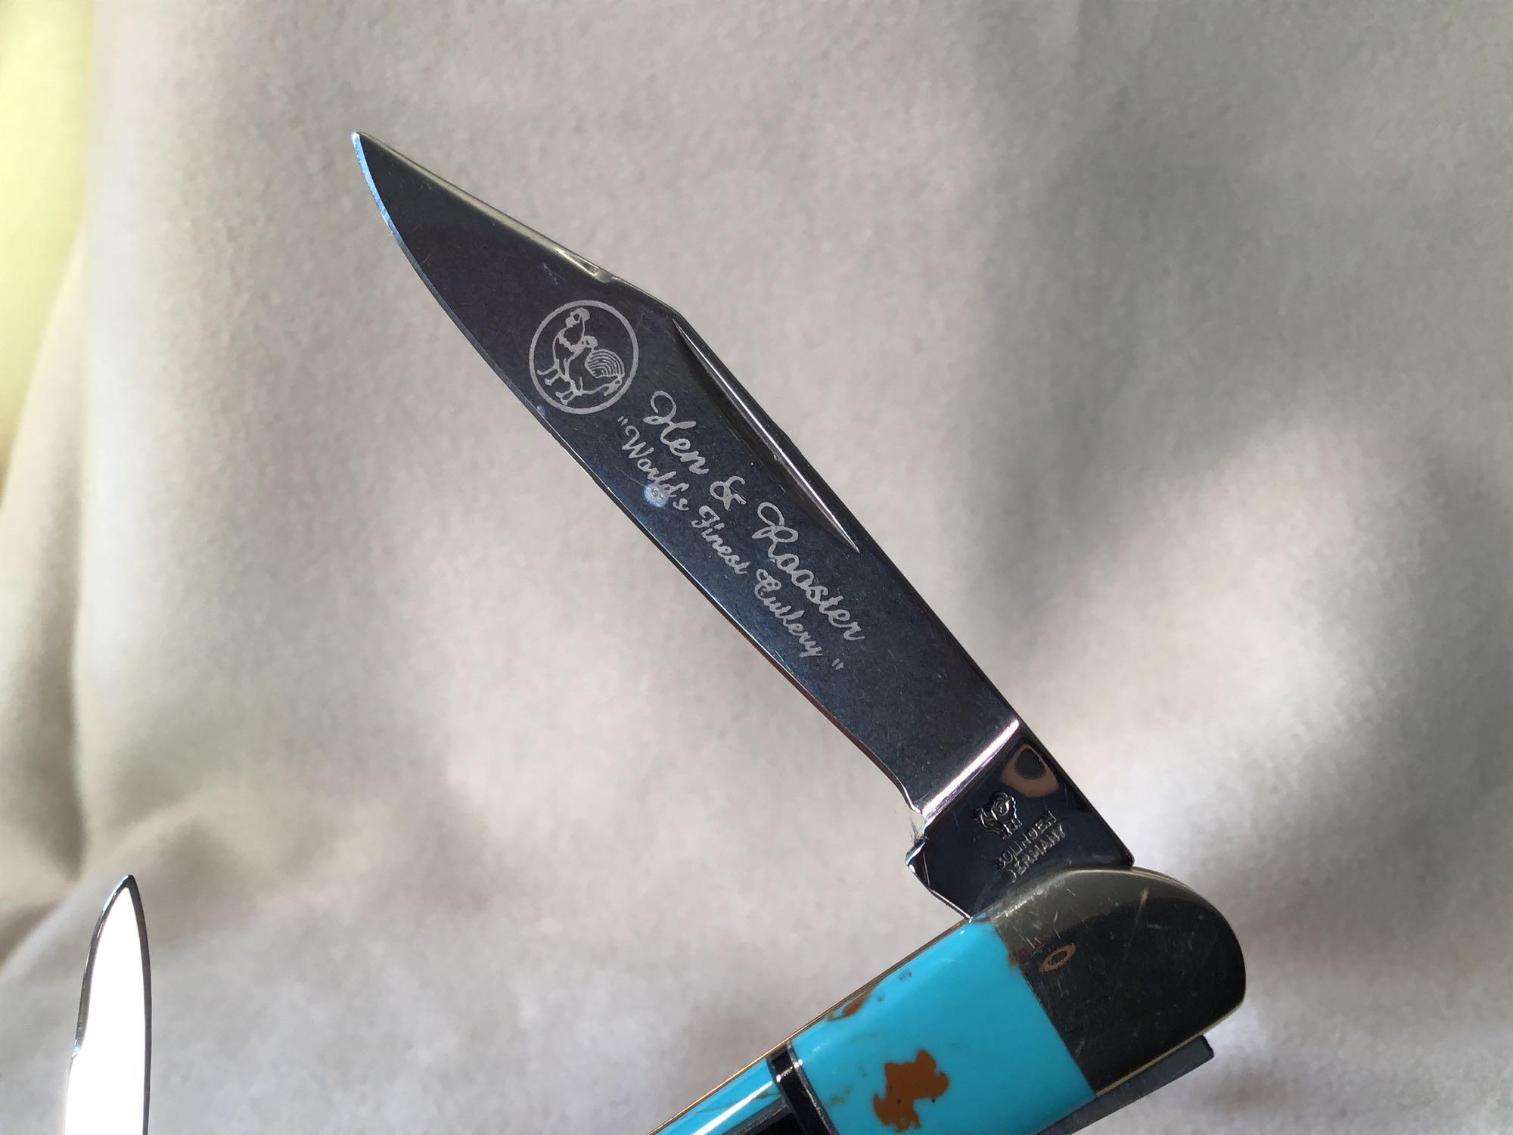 Image for Hen and Rooster Inlaid Knife